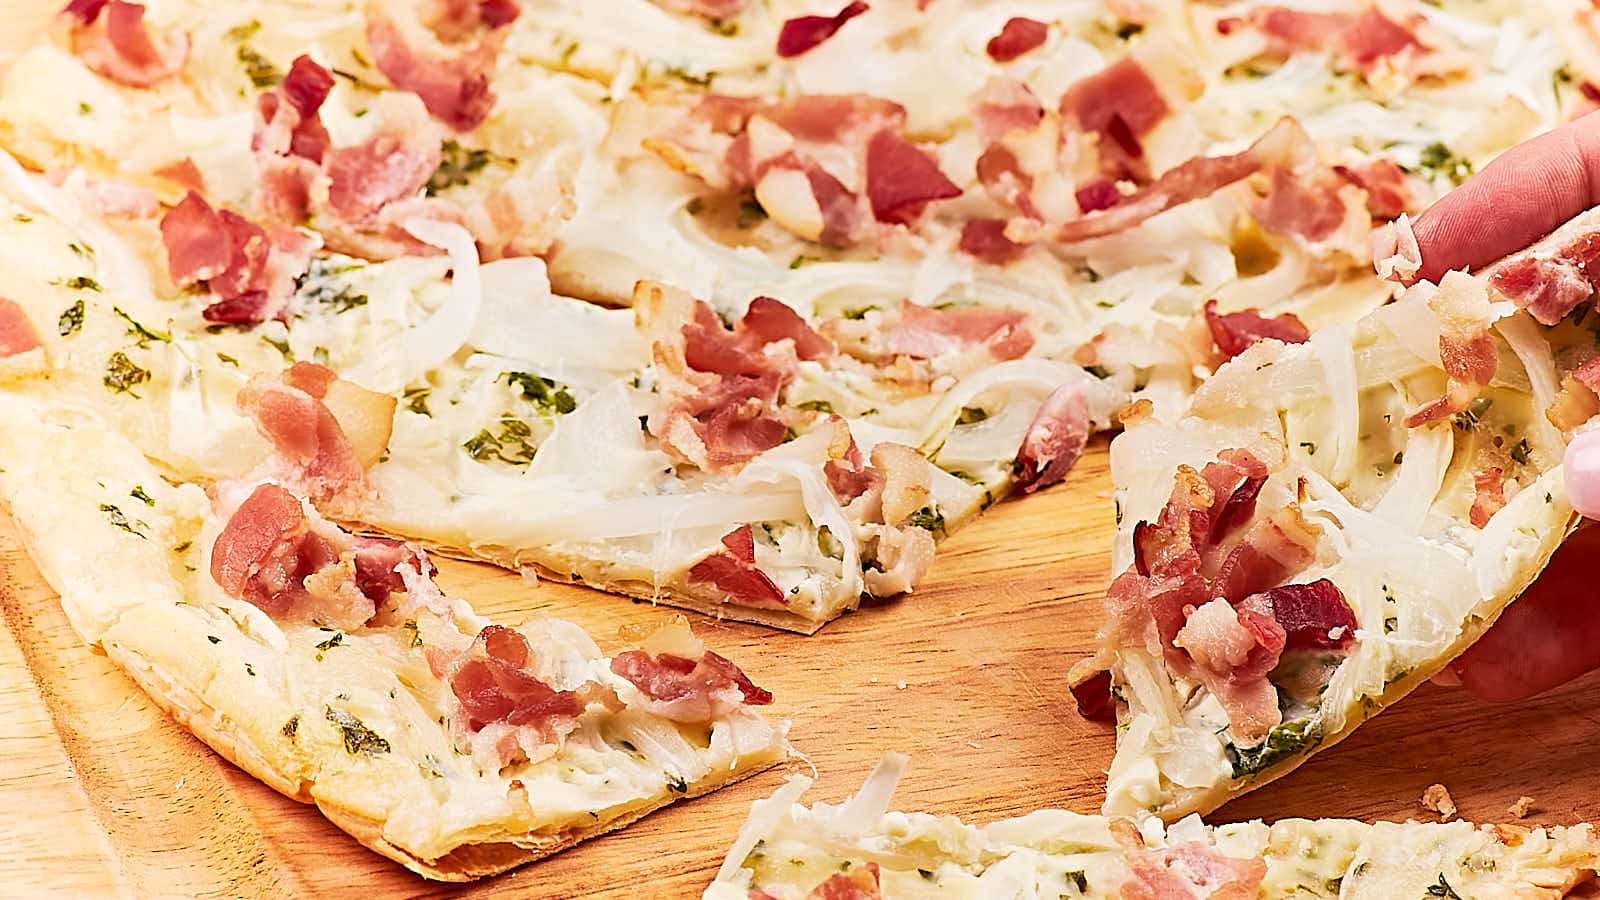 German Bacon and Onion Flatbread Pizza (Flammkuchen) recipe by Cheerful Cook.